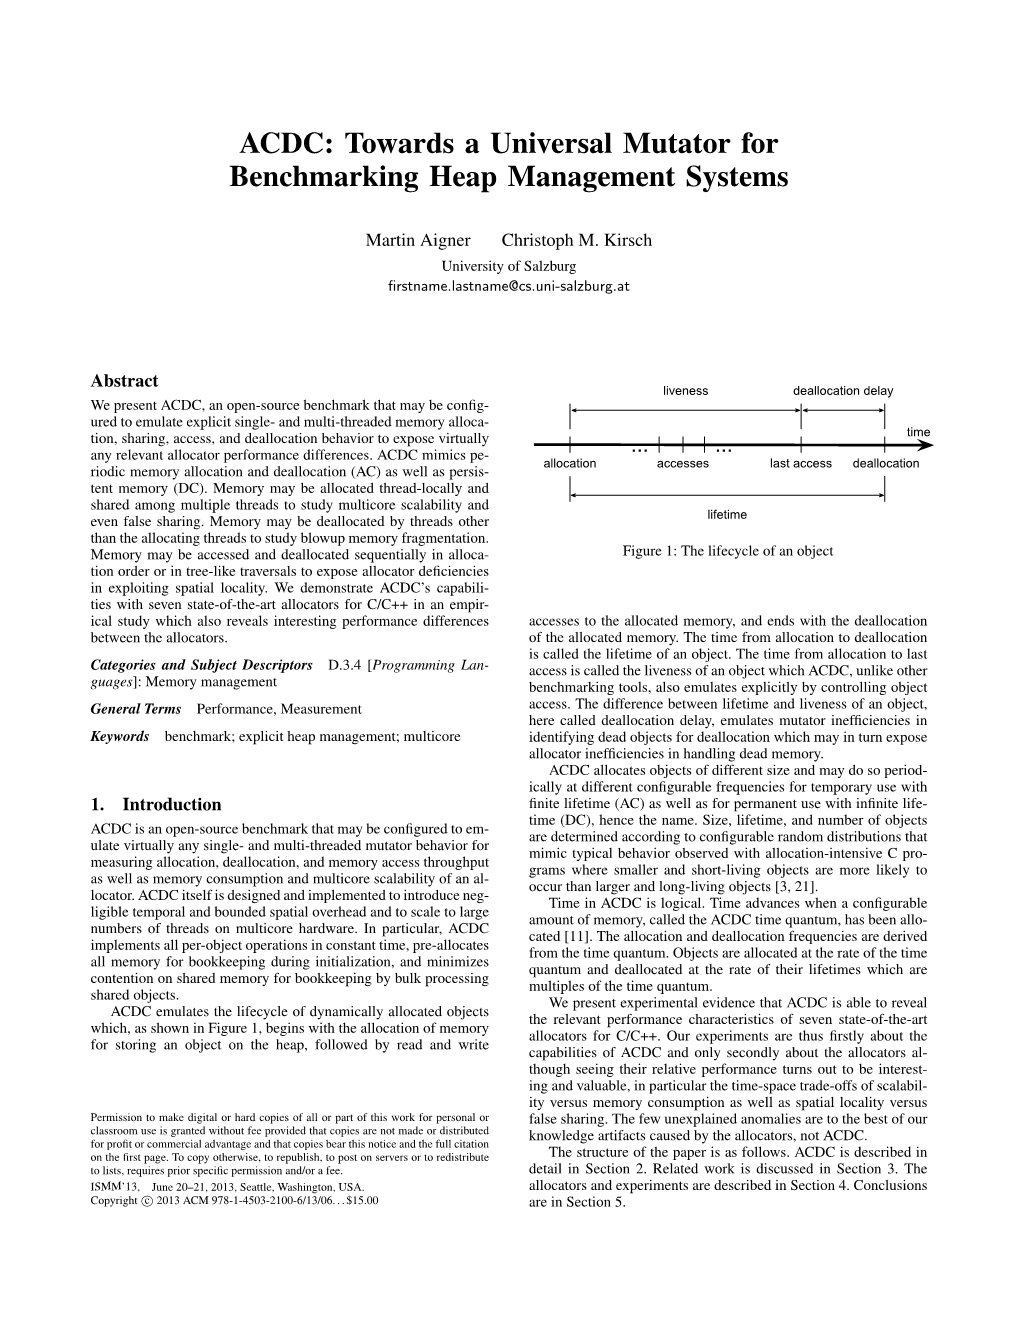 ACDC: Towards a Universal Mutator for Benchmarking Heap Management Systems